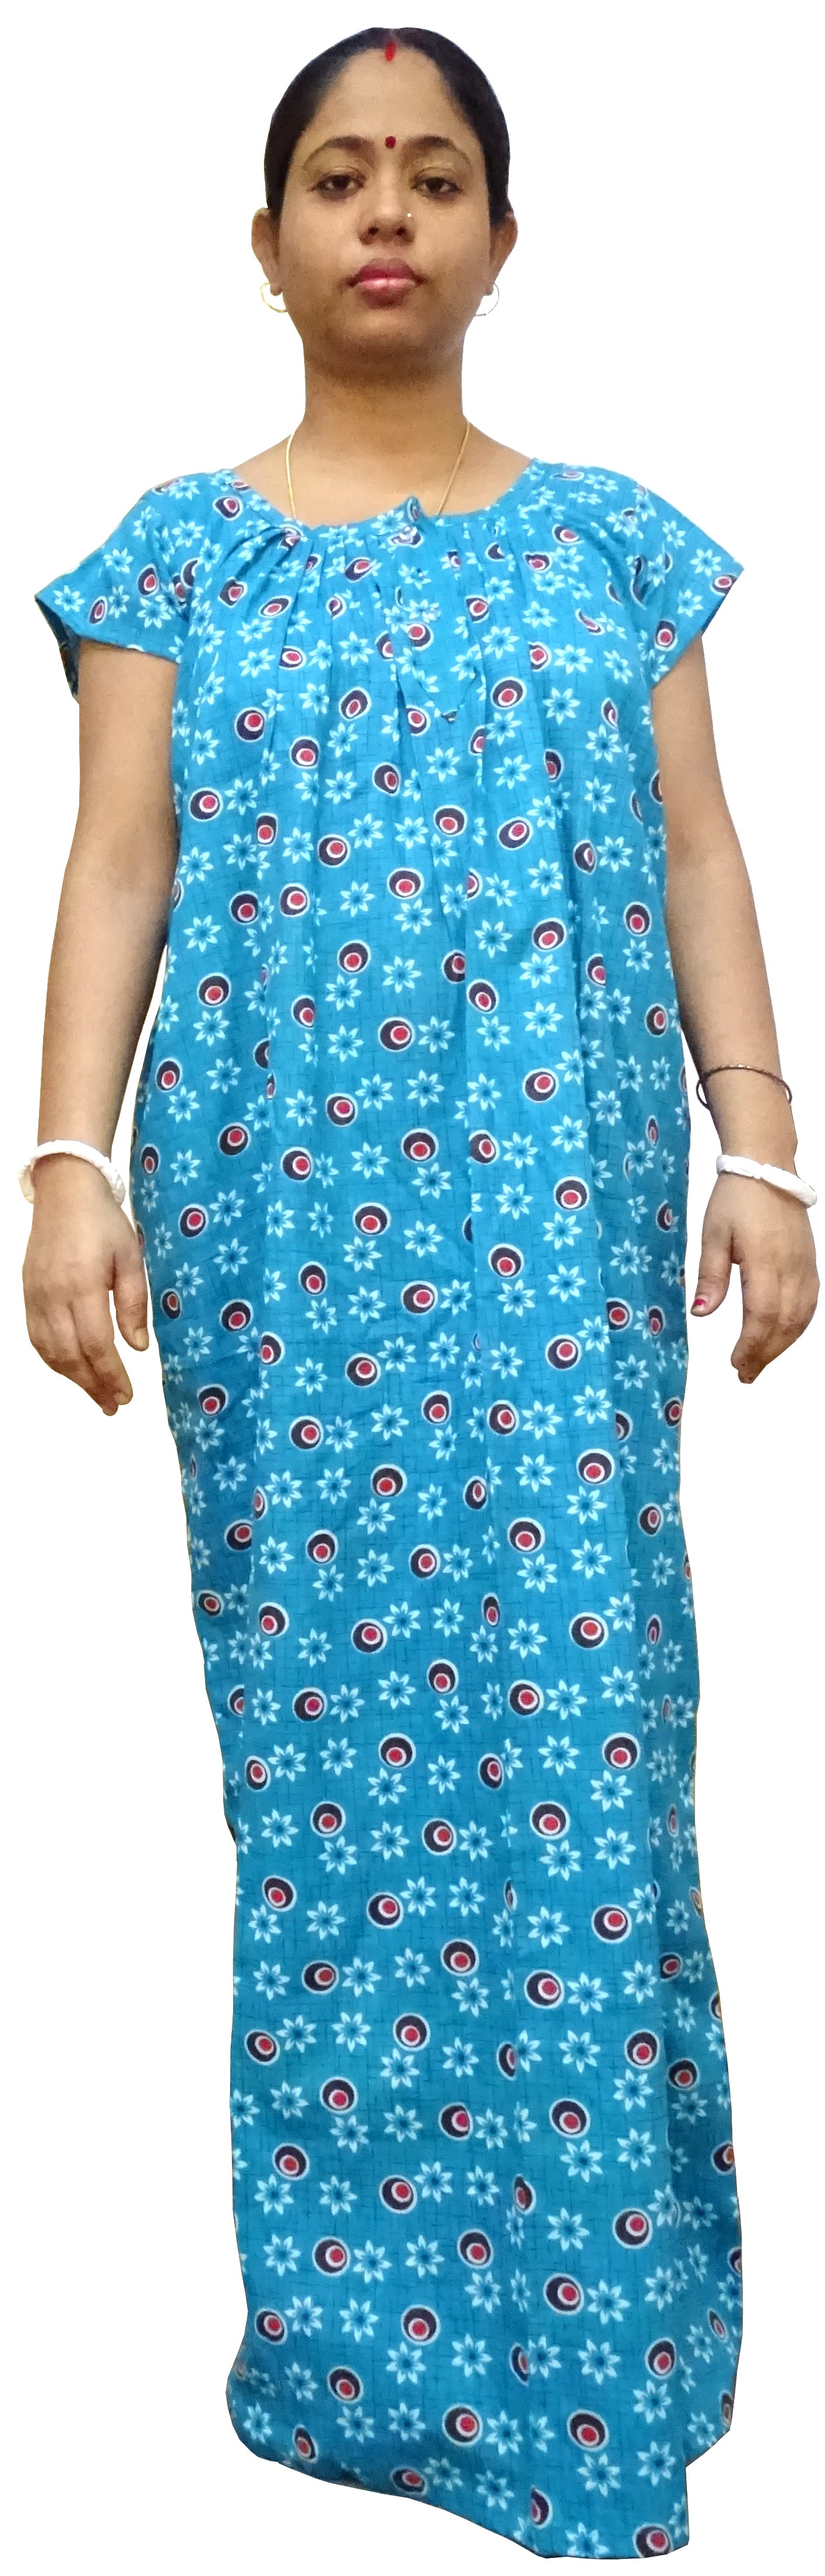 Nighty for Women Cotton Printed, Free Size, Blue body with dots (Pack of 1)